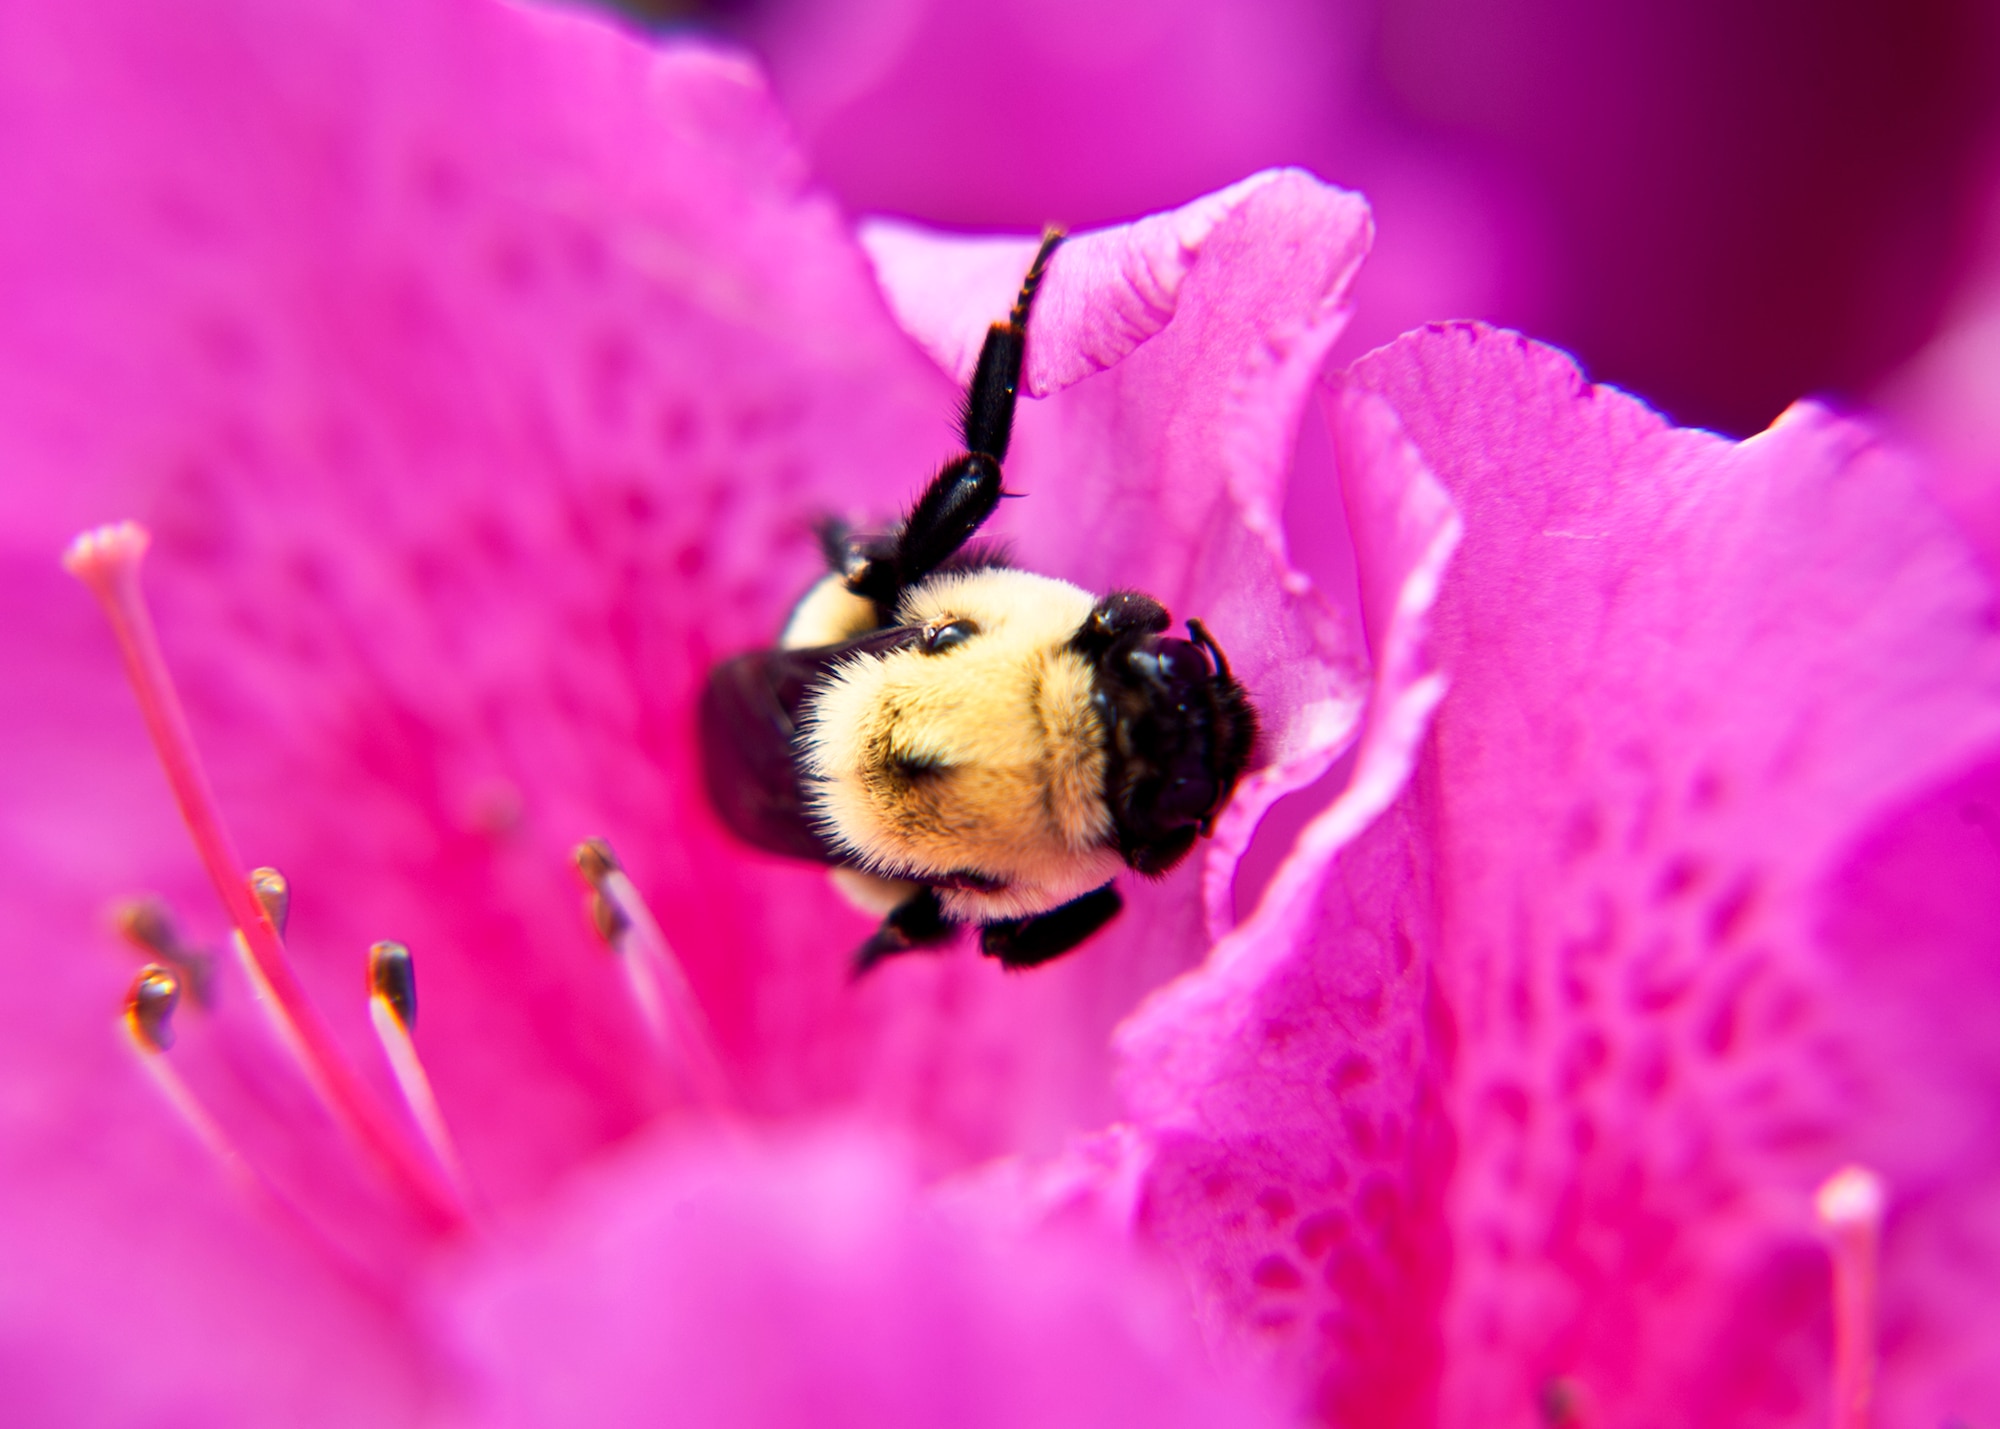 A bee inspects an Azalea flower in front of the Air Armament Center headquarters.  All of the Azalea bushes were in full bloom last week around the building. (U.S. Air Force photo/Samuel King Jr.)